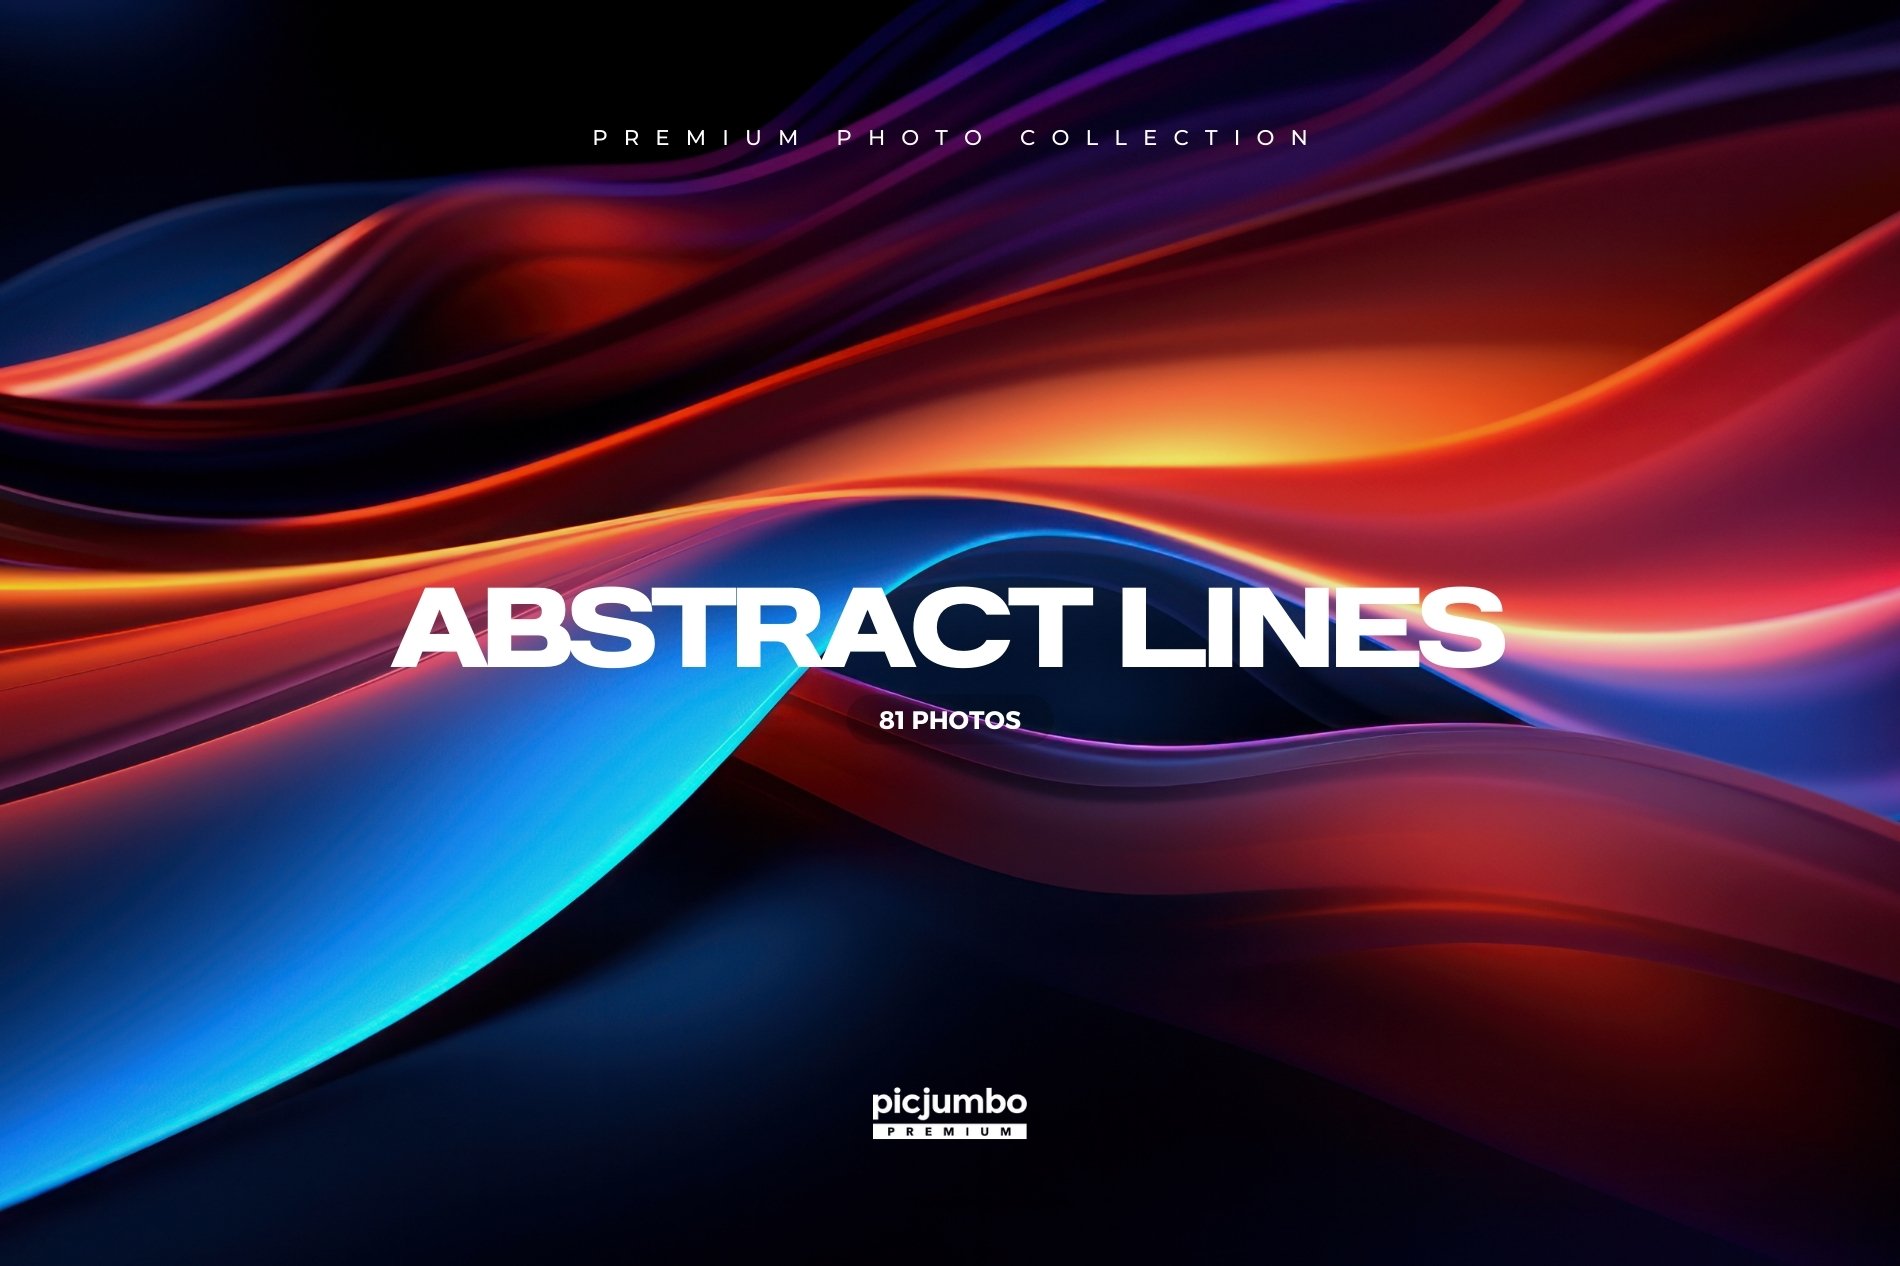 Abstract Lines Stock Photo Collection